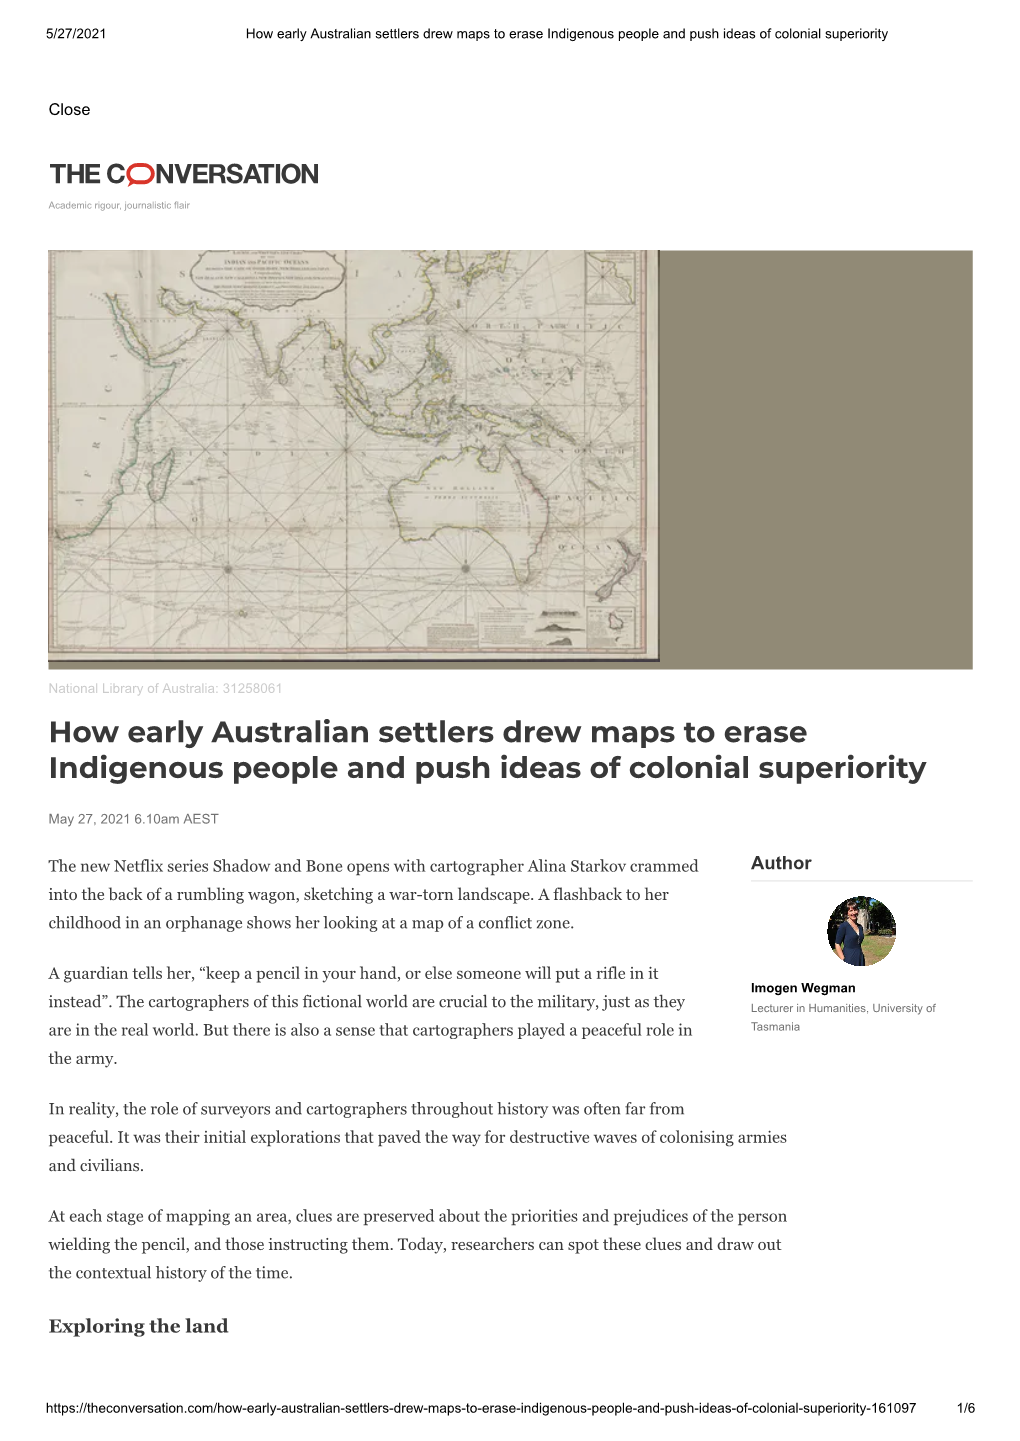 How Early Australian Settlers Drew Maps to Erase Indigenous People and Push Ideas of Colonial Superiority